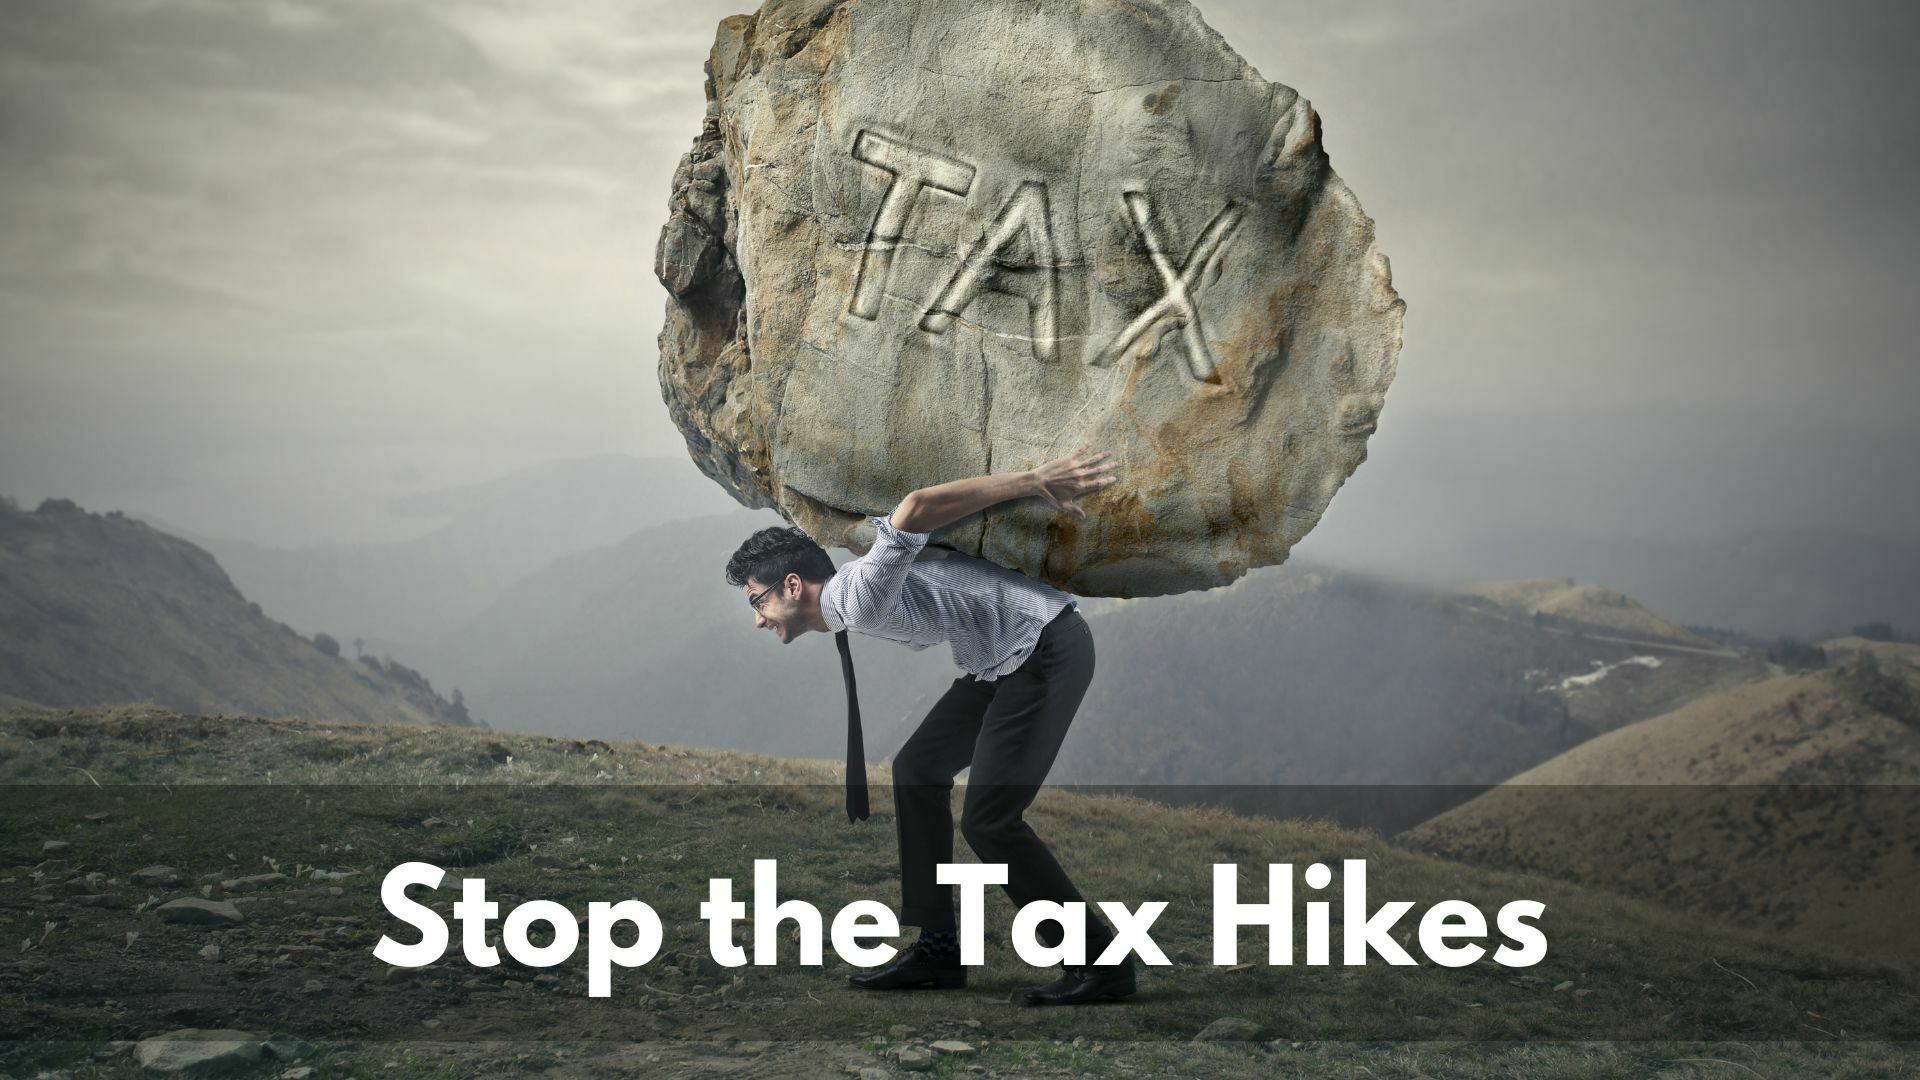 Stop the tax hikes 1920x1080